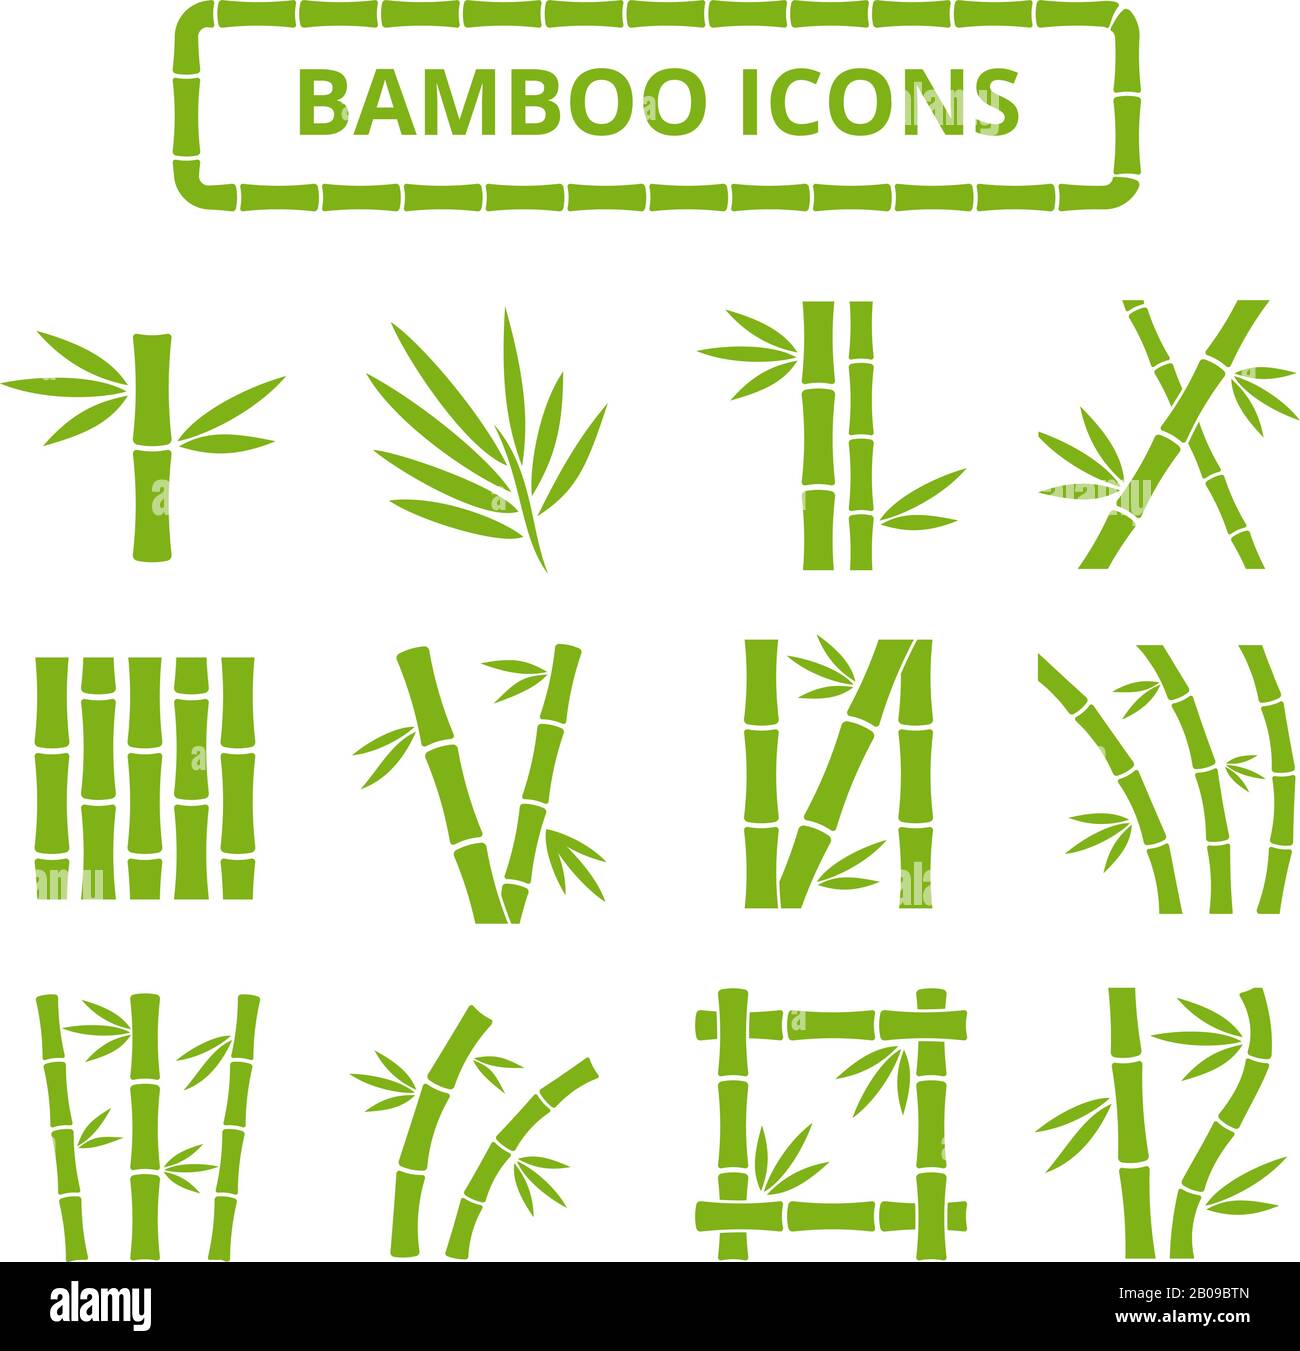 Bamboo stalks and leaves vector icons. Asian bambu zen plants isolated on white background. Stick bamboo with foliage, curve frame bamboo illustration Stock Vector